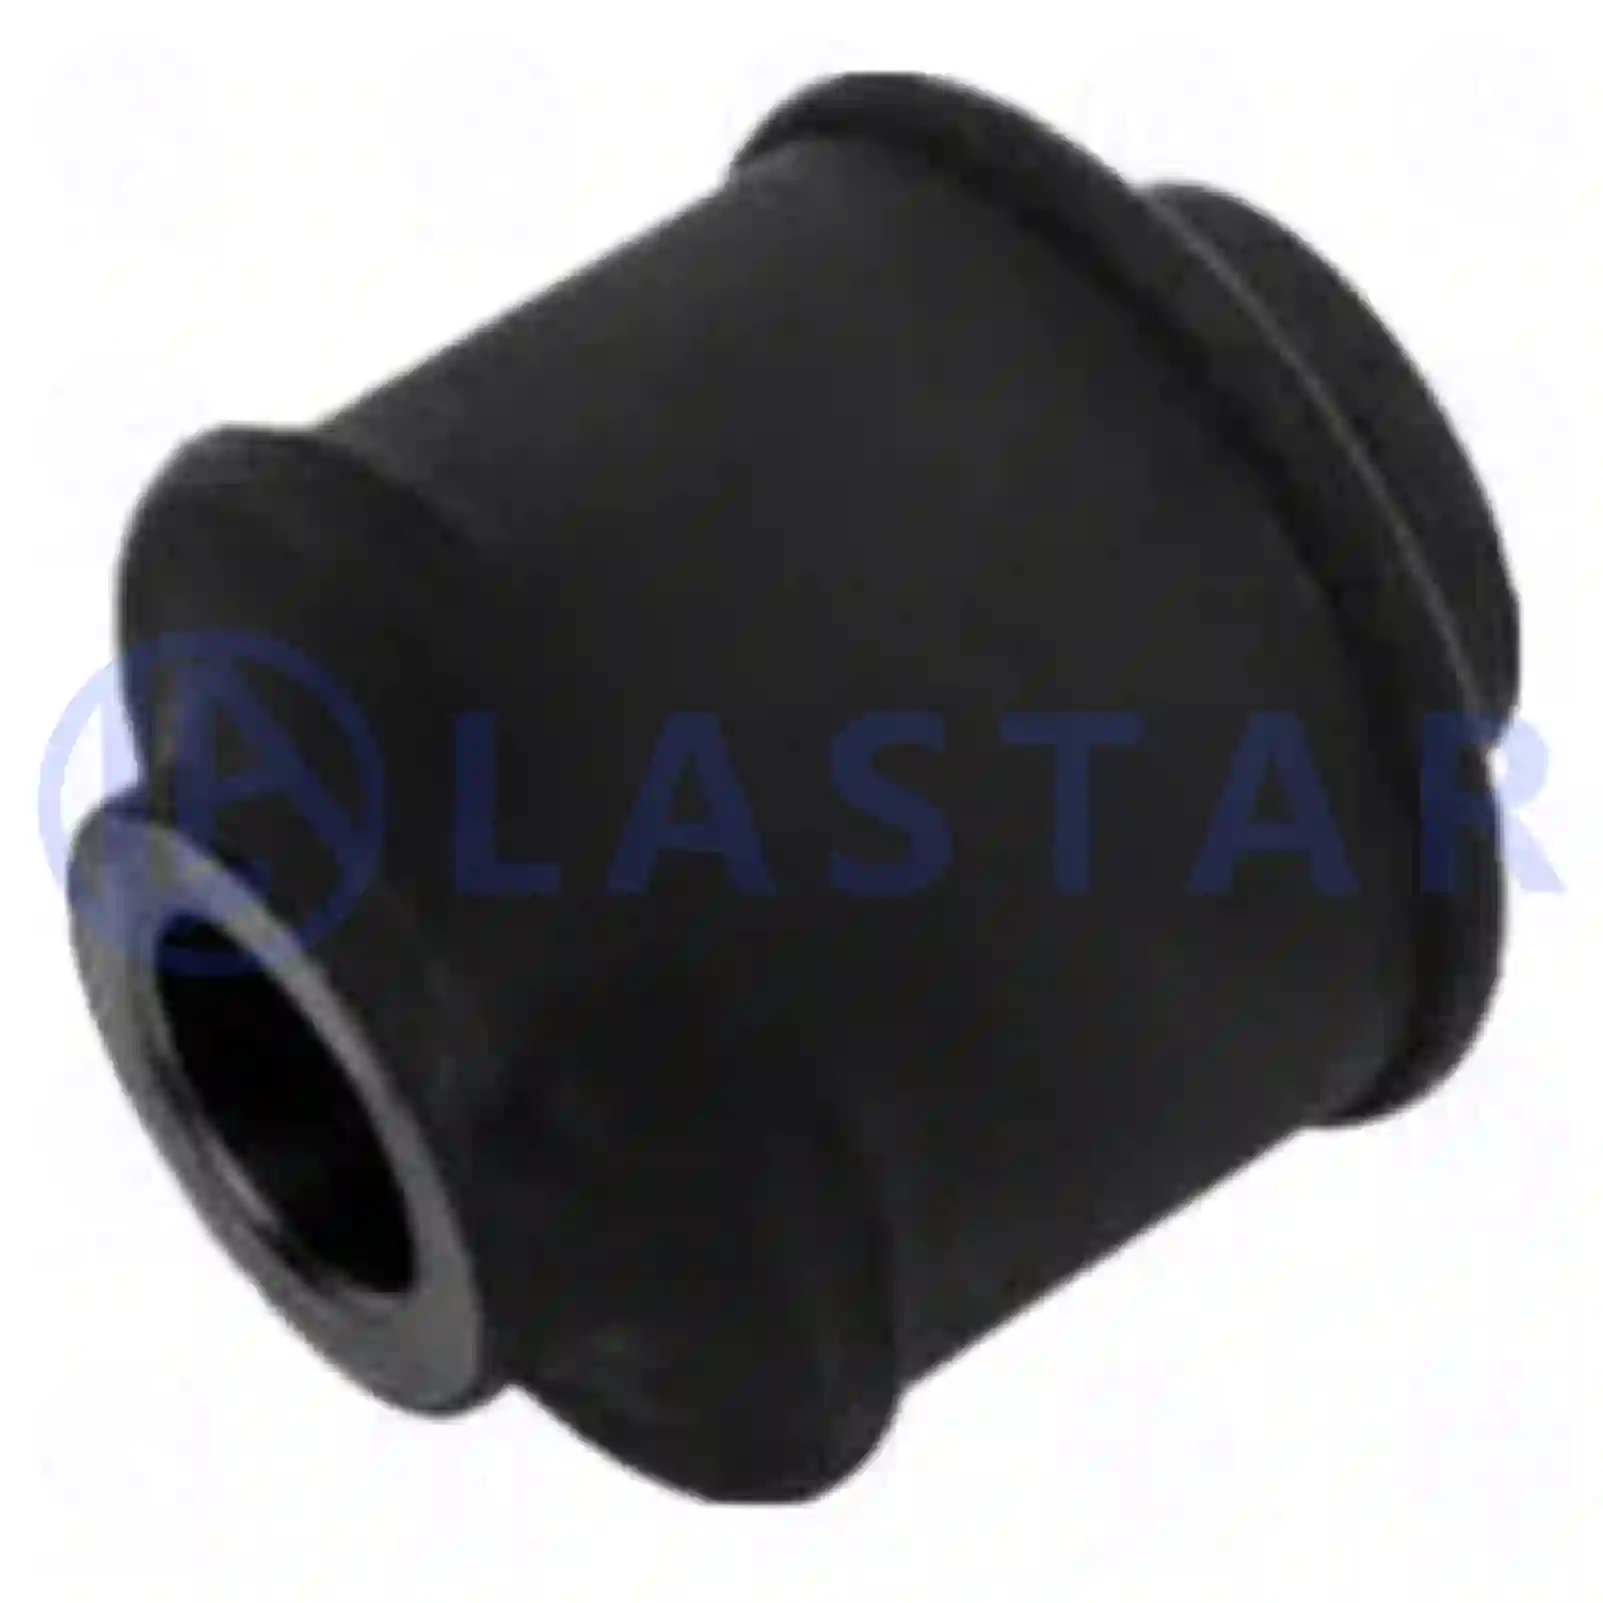 Rubber bushing, shock absorber, 77728185, 0003200144, 0003201444, 1697731, 6794716, ZG41476-0008 ||  77728185 Lastar Spare Part | Truck Spare Parts, Auotomotive Spare Parts Rubber bushing, shock absorber, 77728185, 0003200144, 0003201444, 1697731, 6794716, ZG41476-0008 ||  77728185 Lastar Spare Part | Truck Spare Parts, Auotomotive Spare Parts